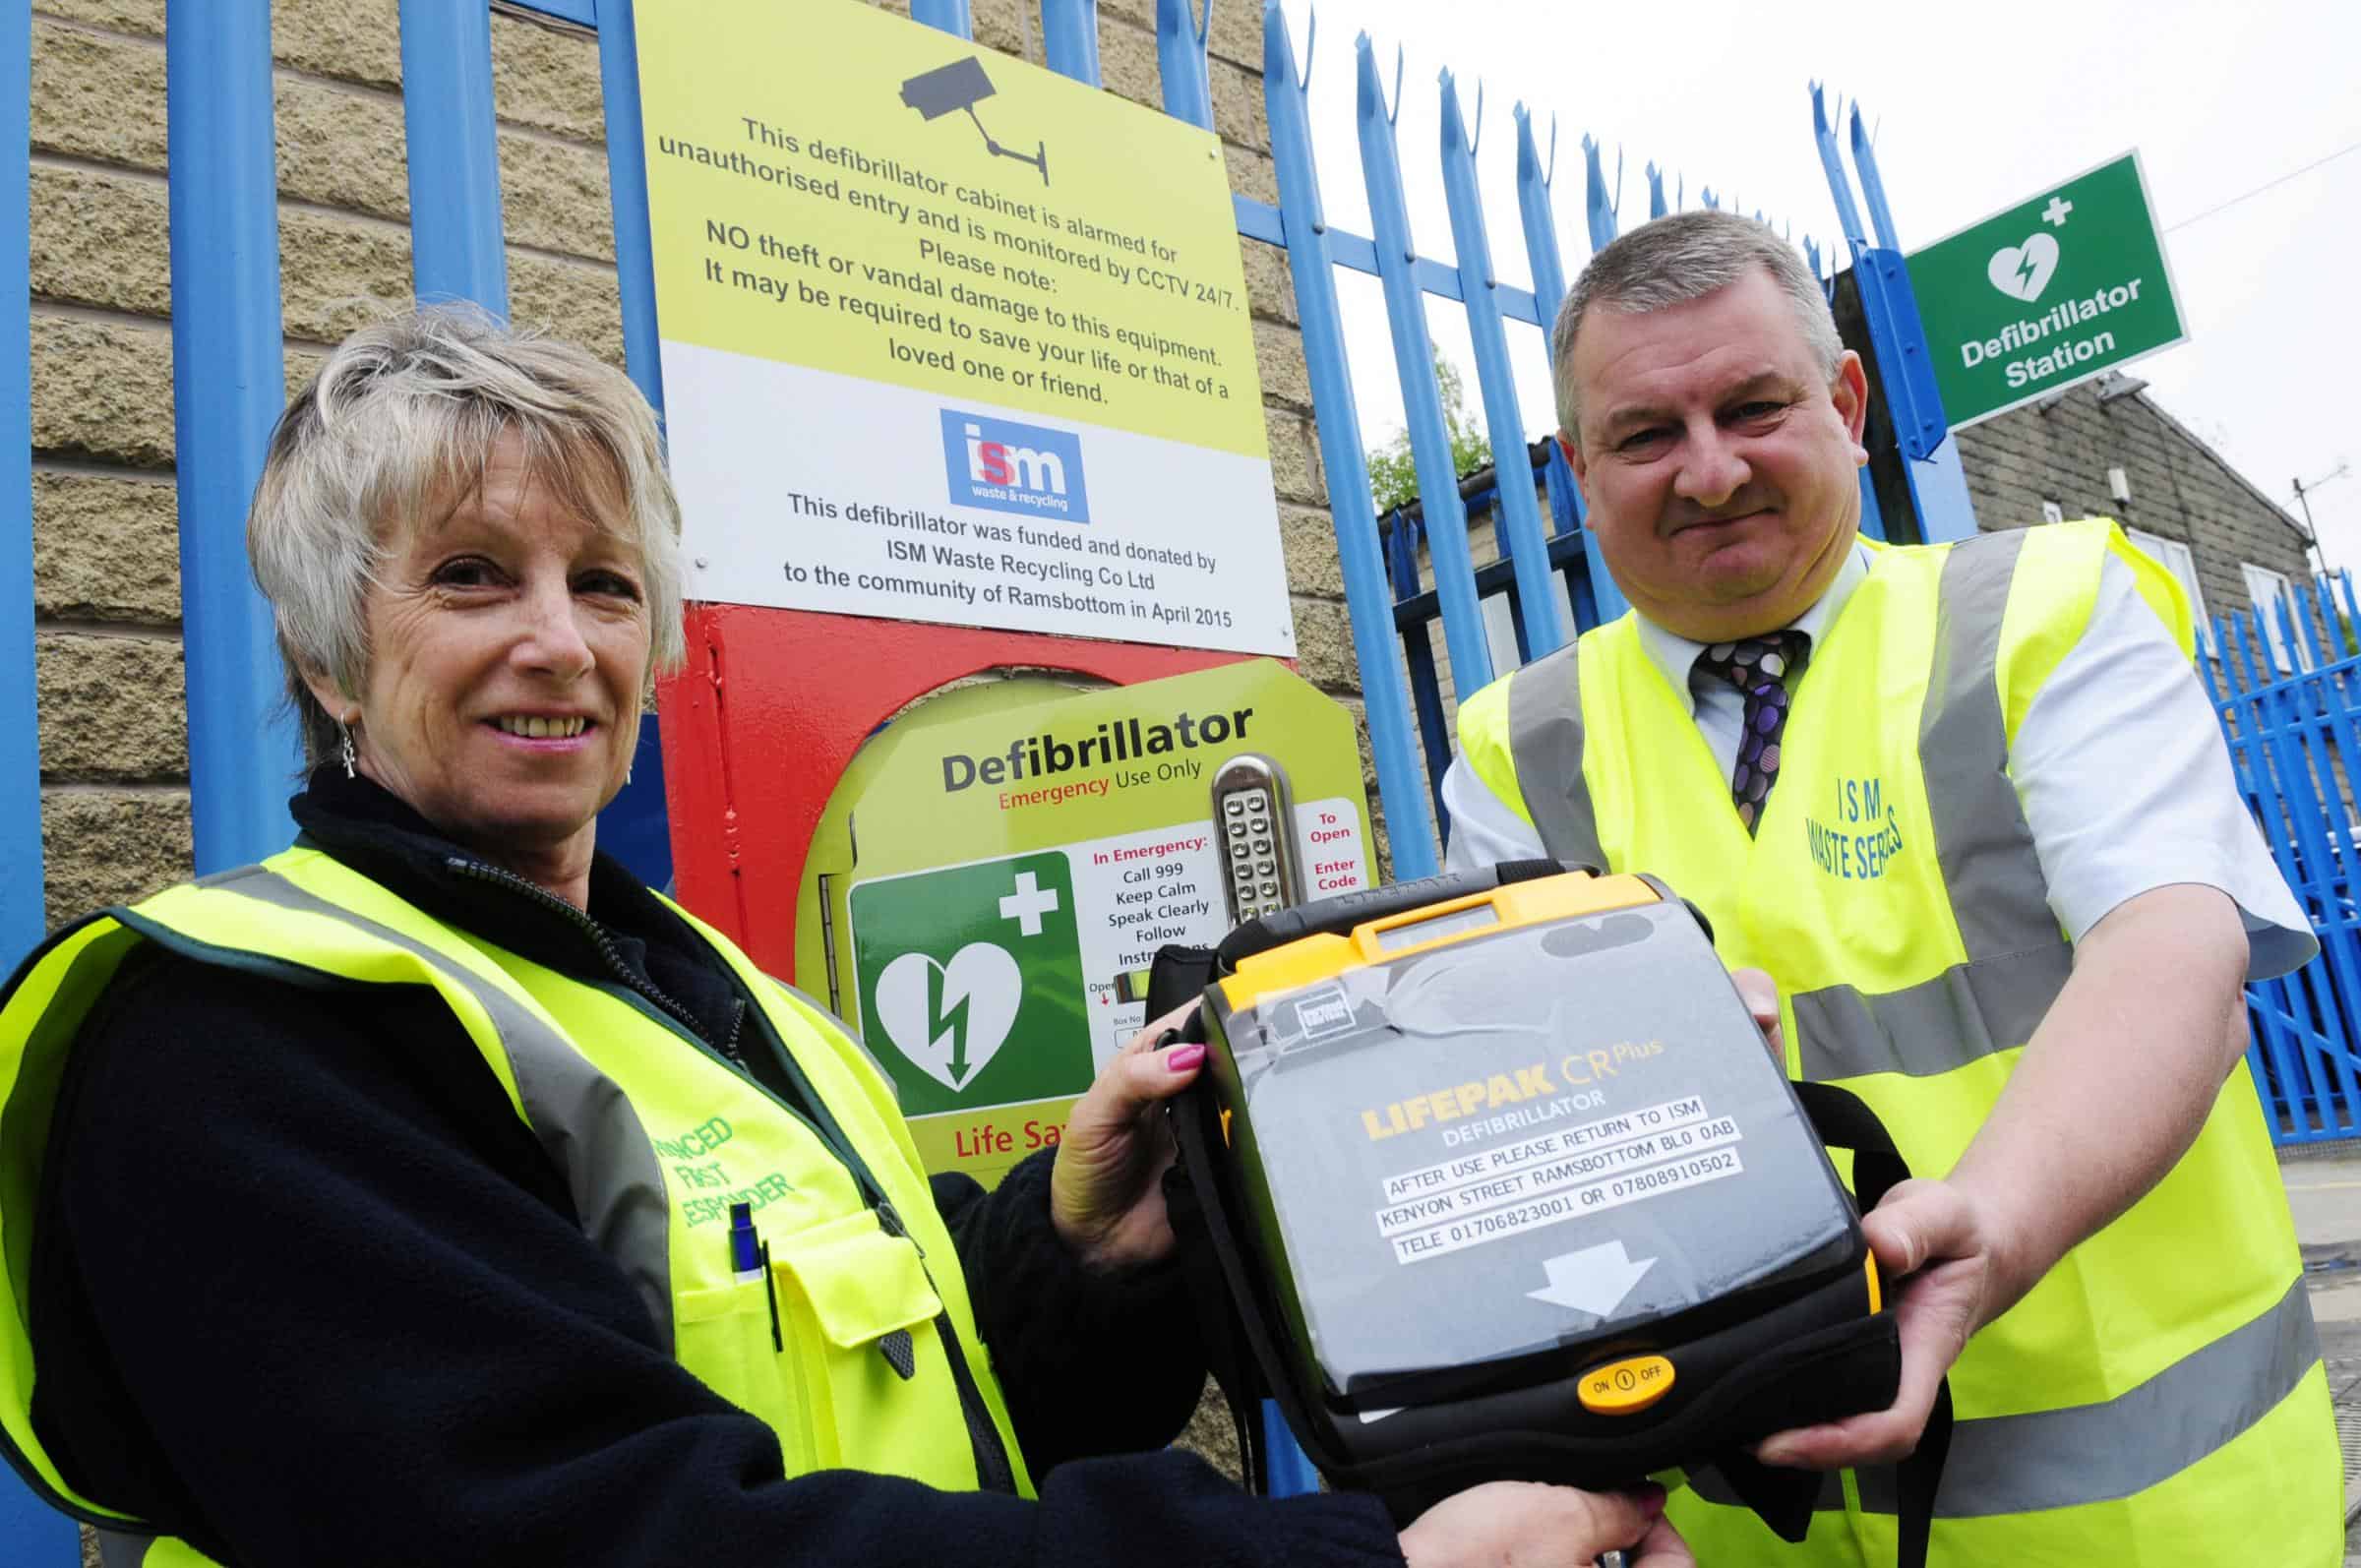 New defibrillator unveiled outside ISM Waste & Recycling on Kenyon Street in Ramsbottom